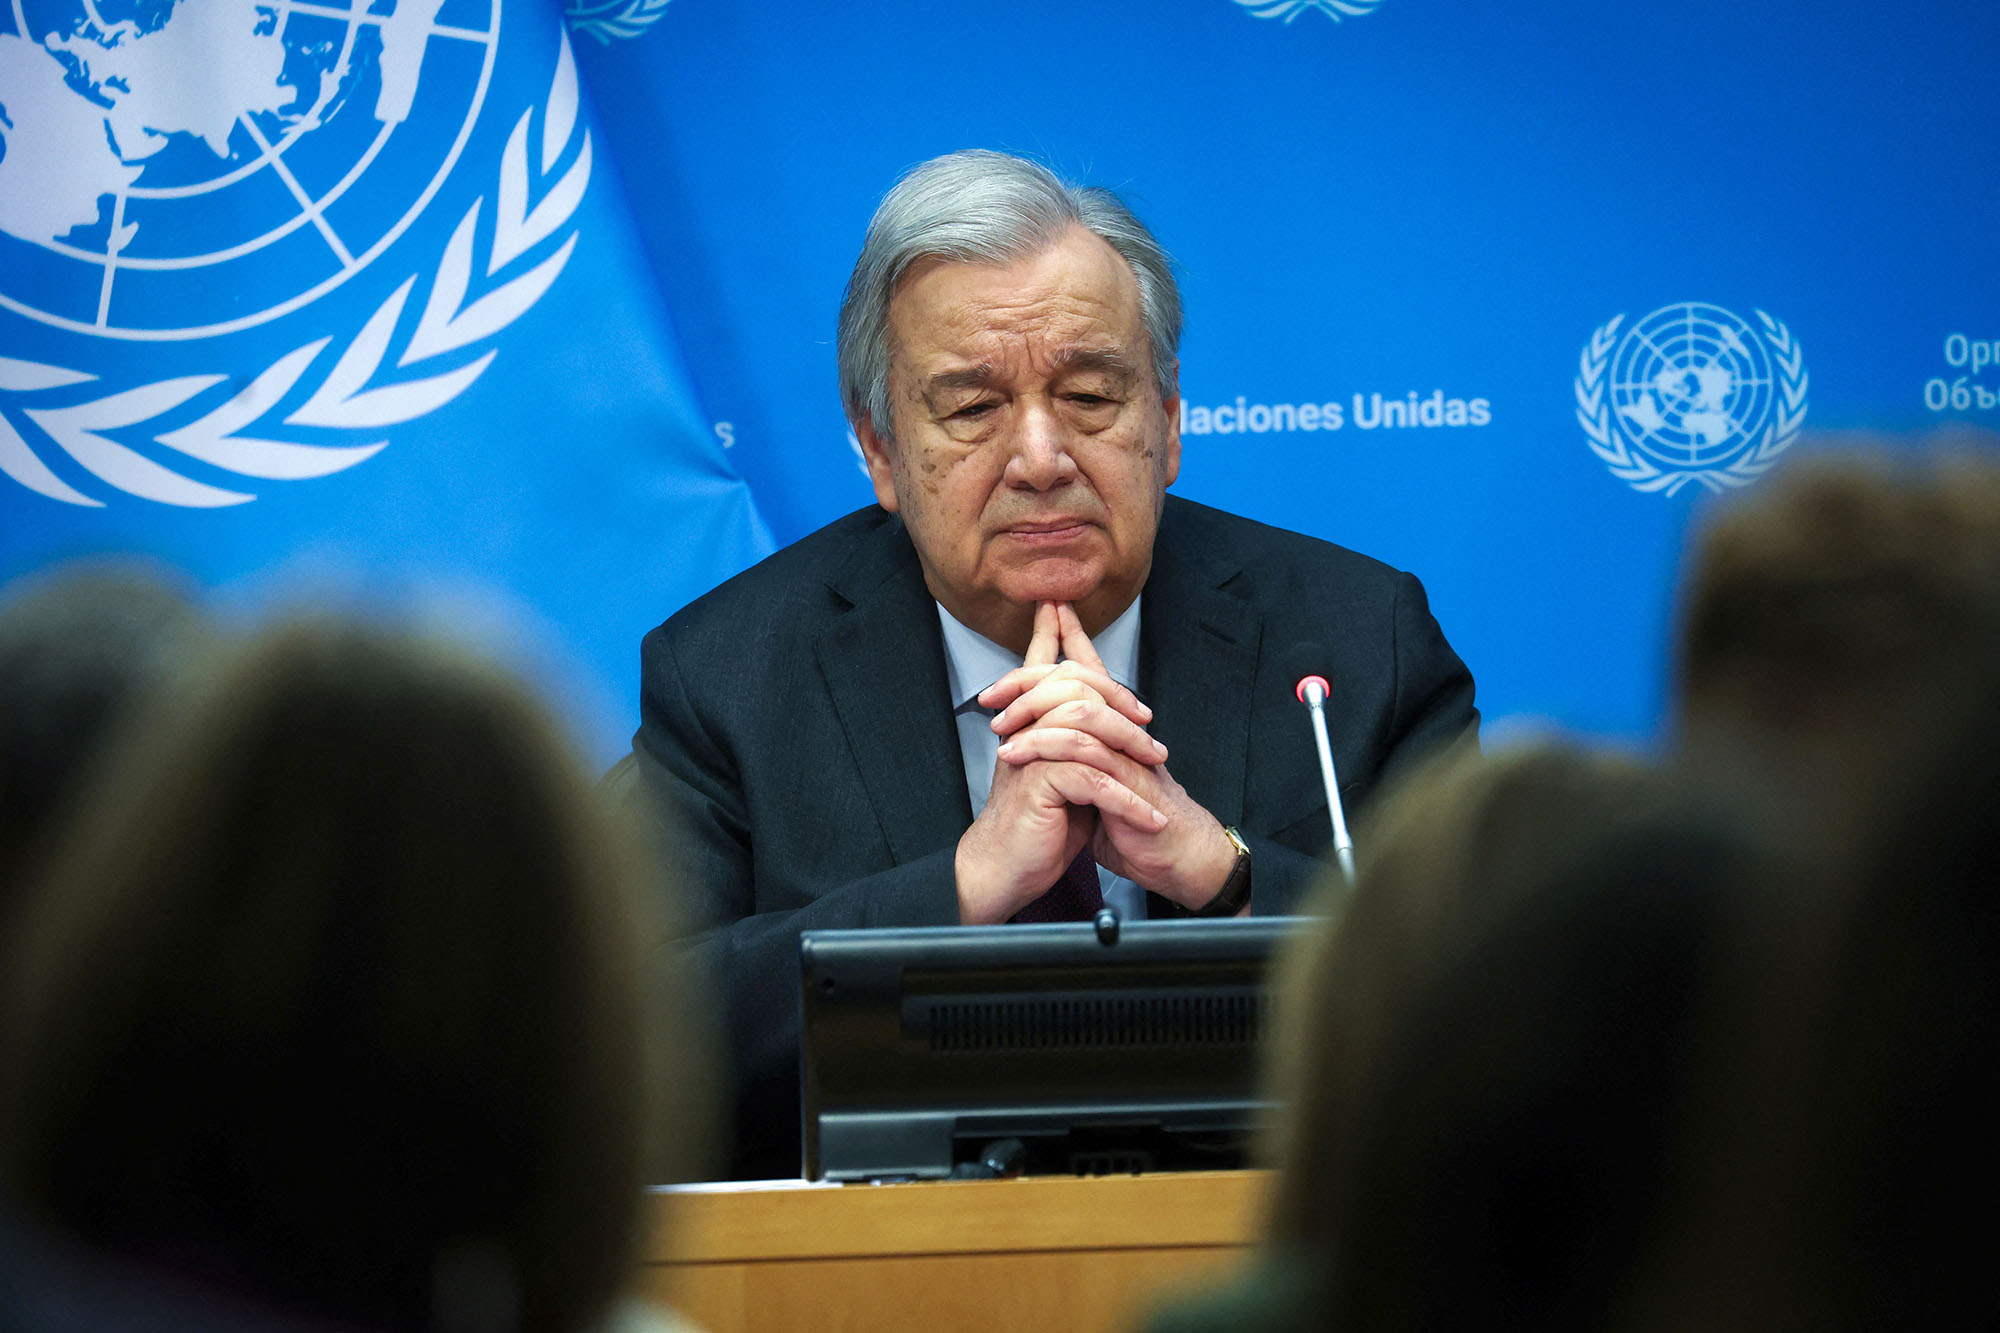 United Nations Secretary General Antonio Guterres attends a press conference at U.N. headquarters in New York City, on February 8.